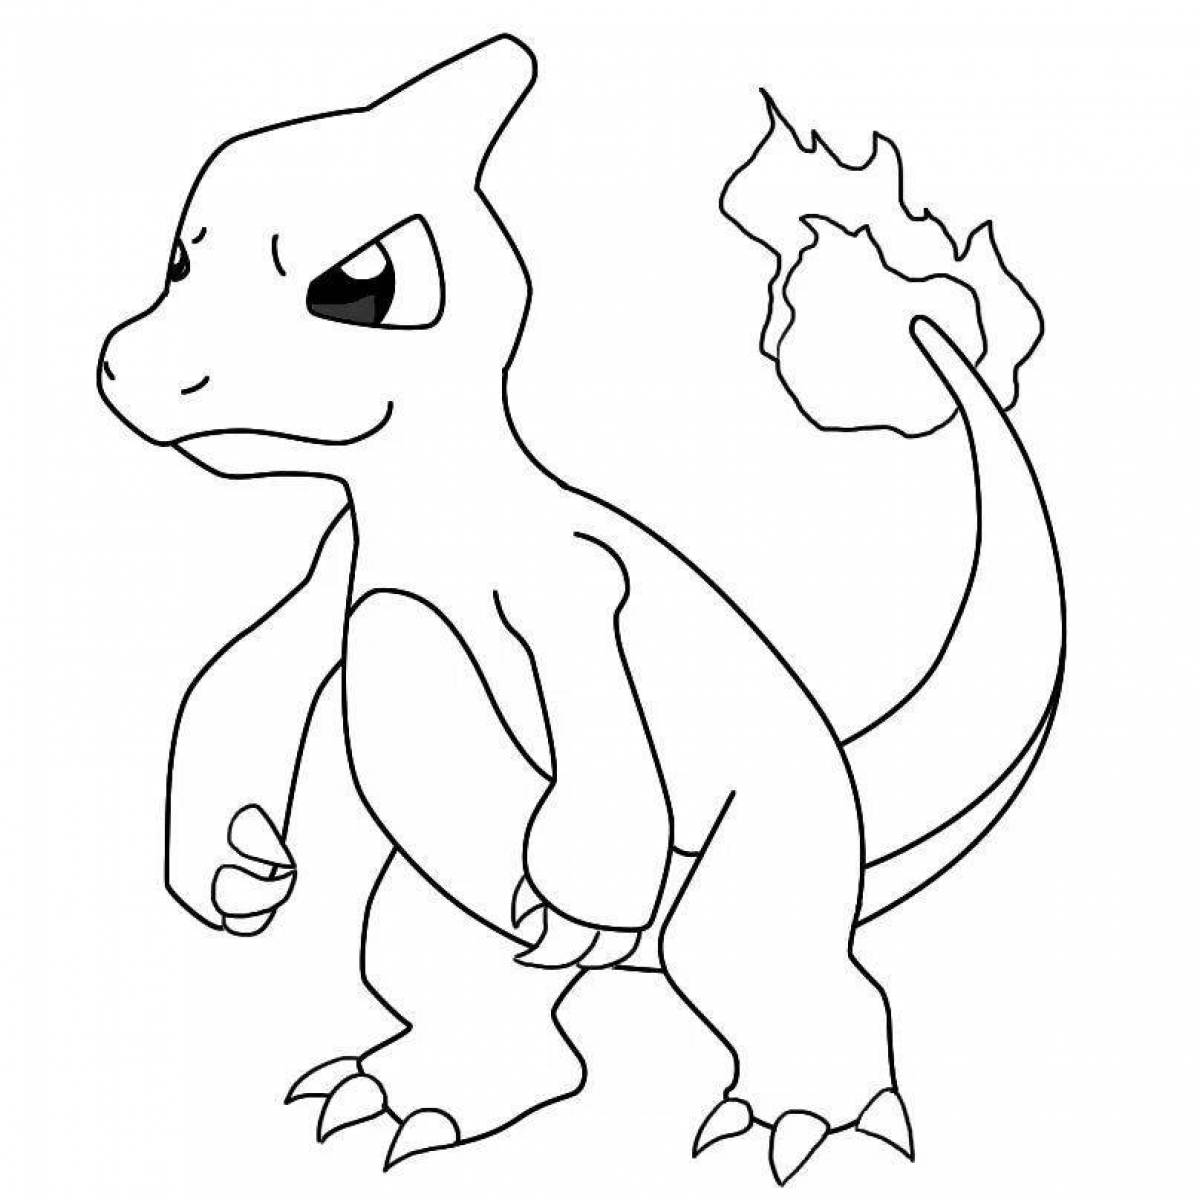 Cheerful charmander coloring page